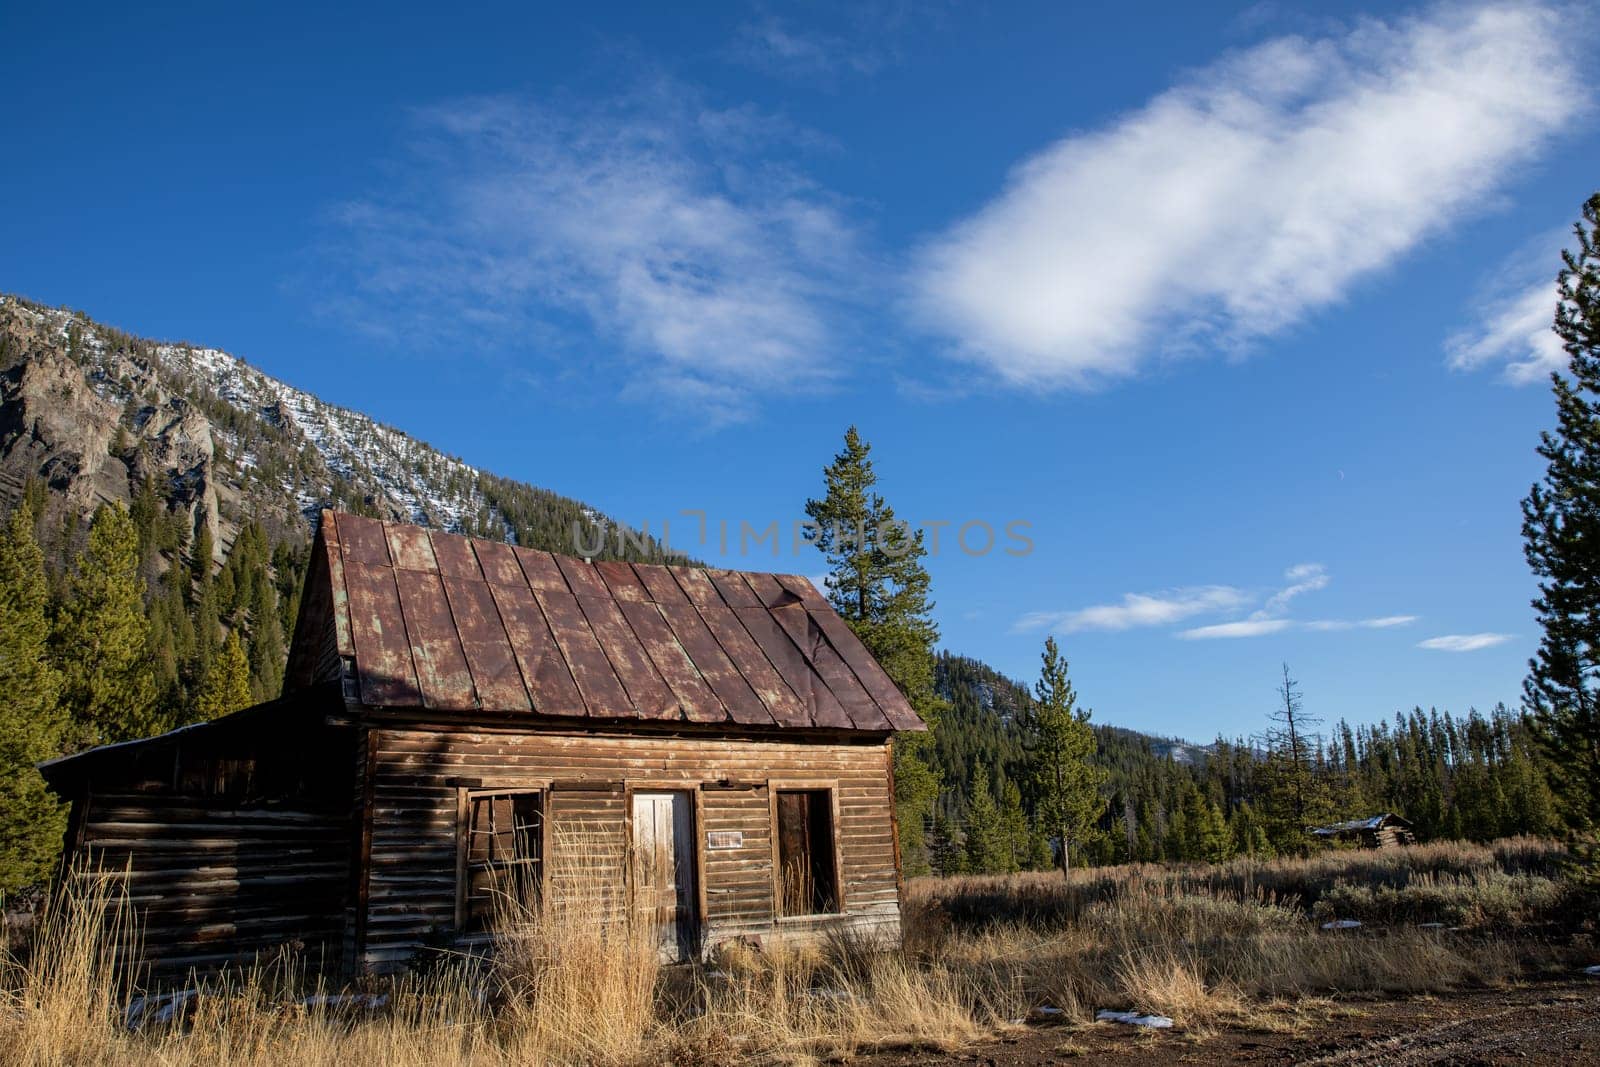 Old mining house in the wilderness of idaho that has been abandoned